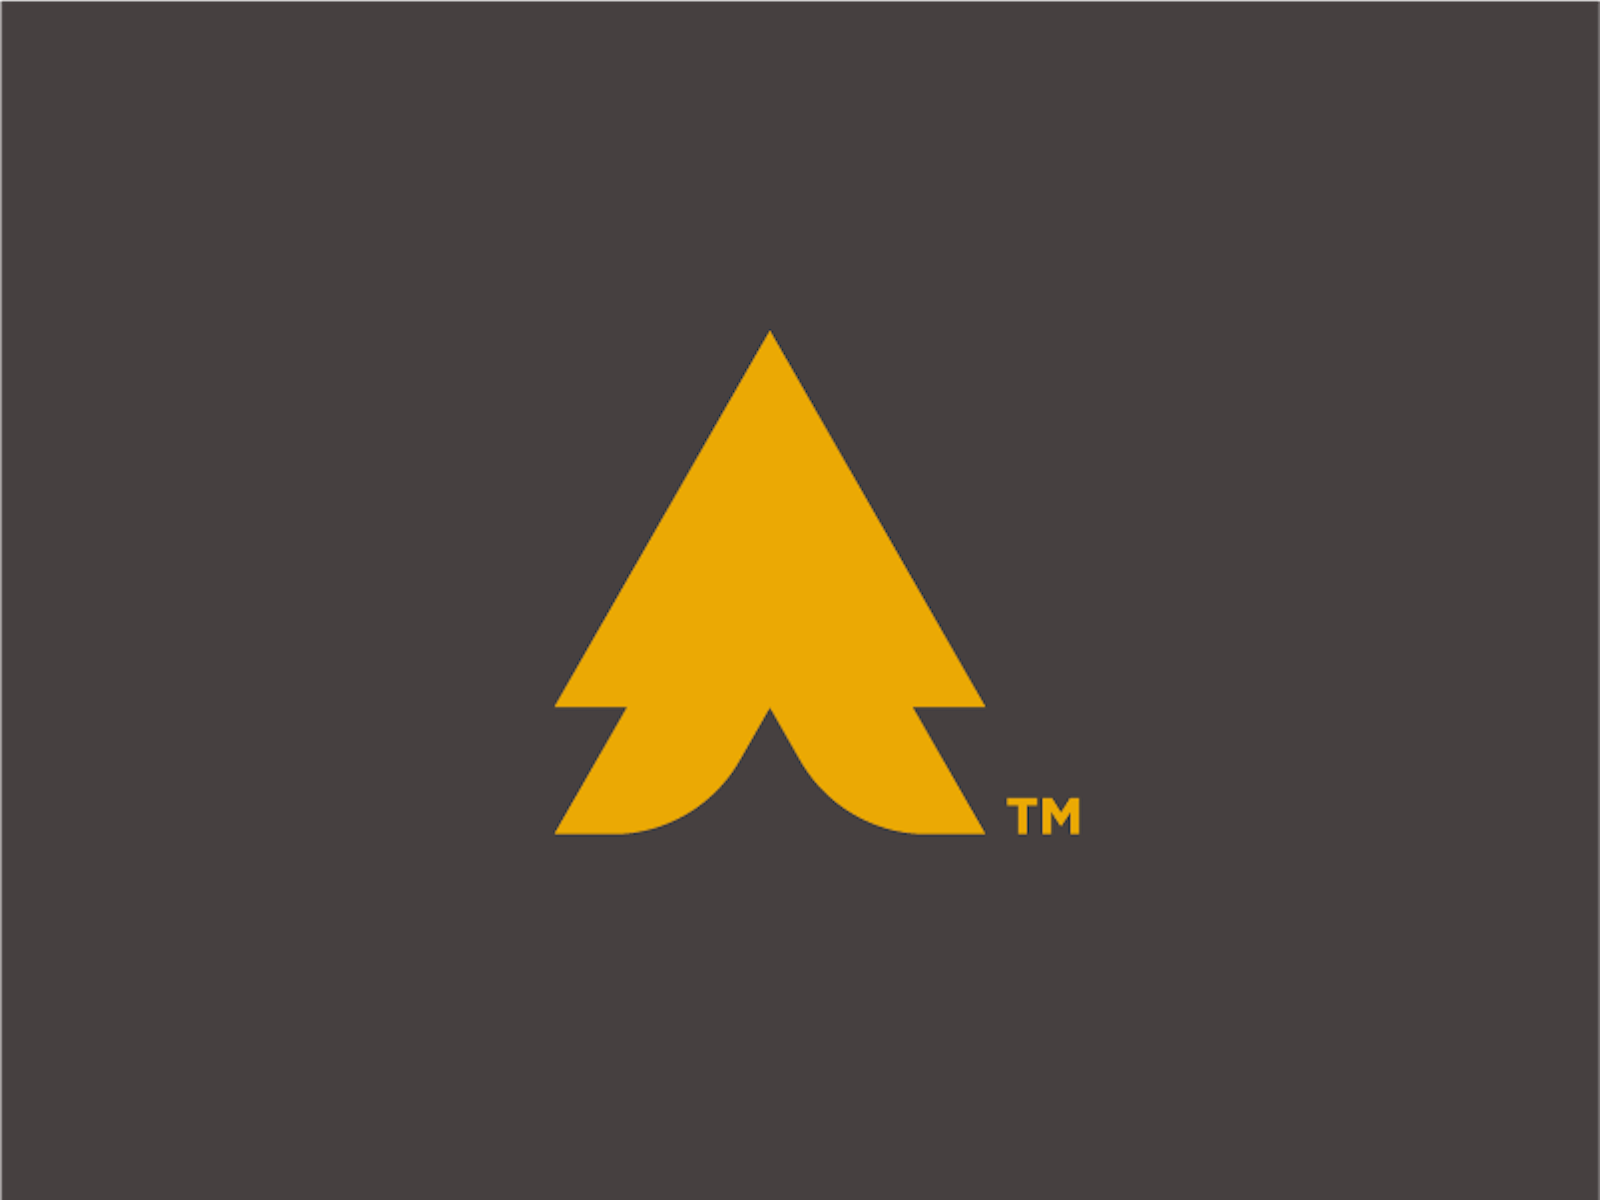 The Lake One Digital brand logo design directional arrow in yellow.